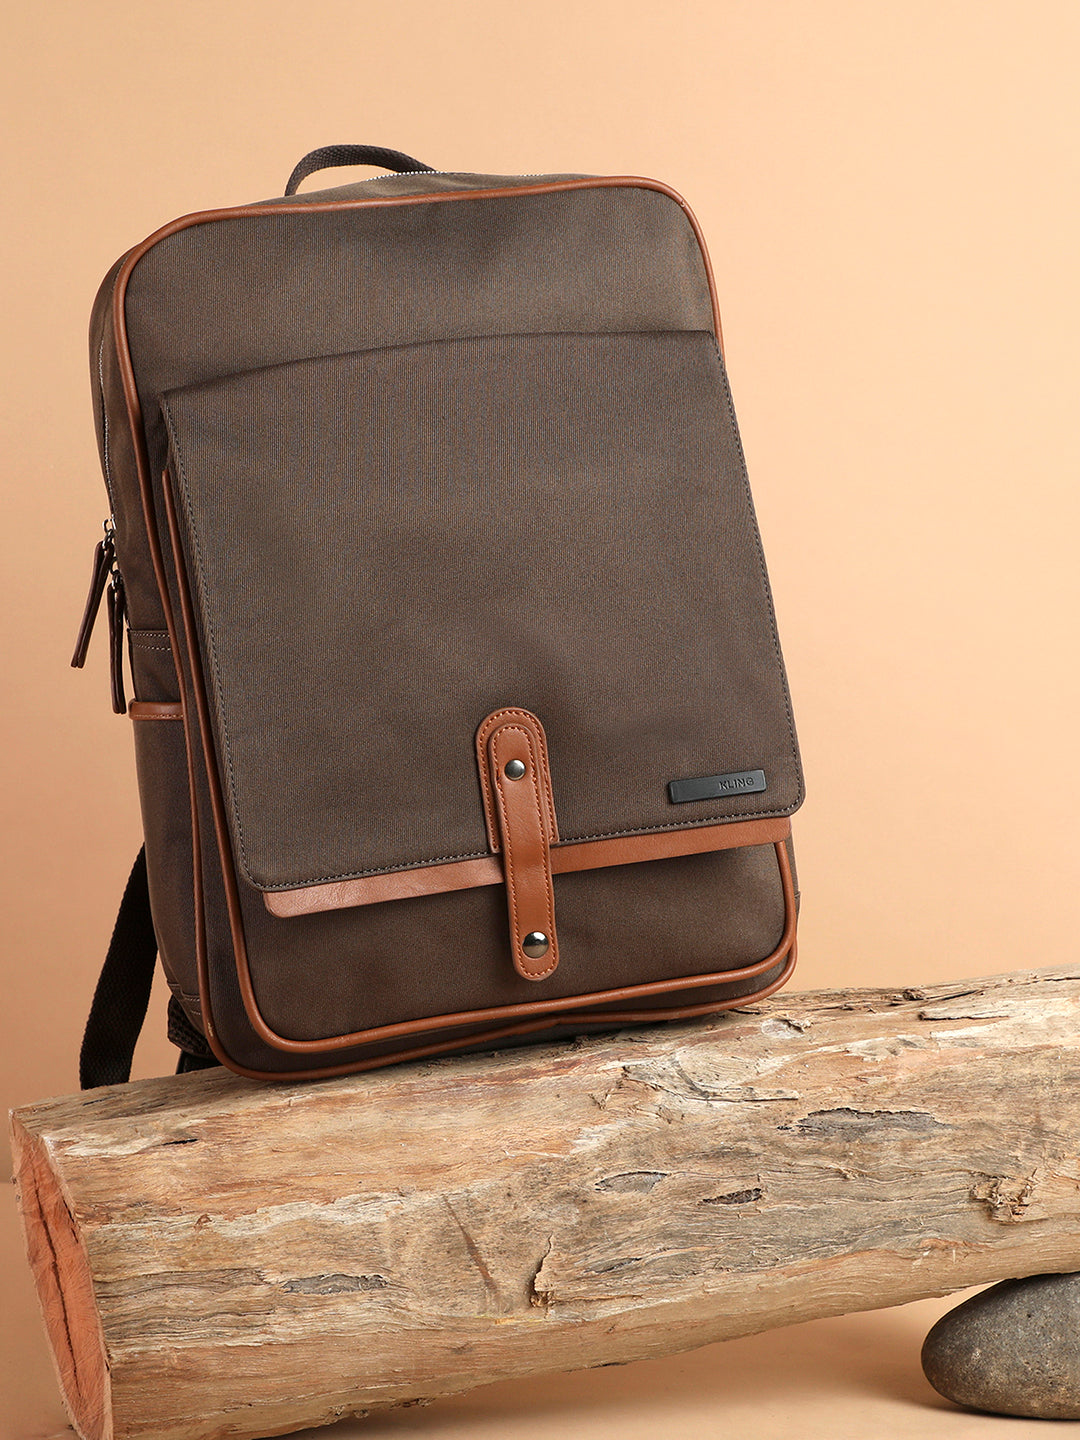 Andrea Brown Backpack